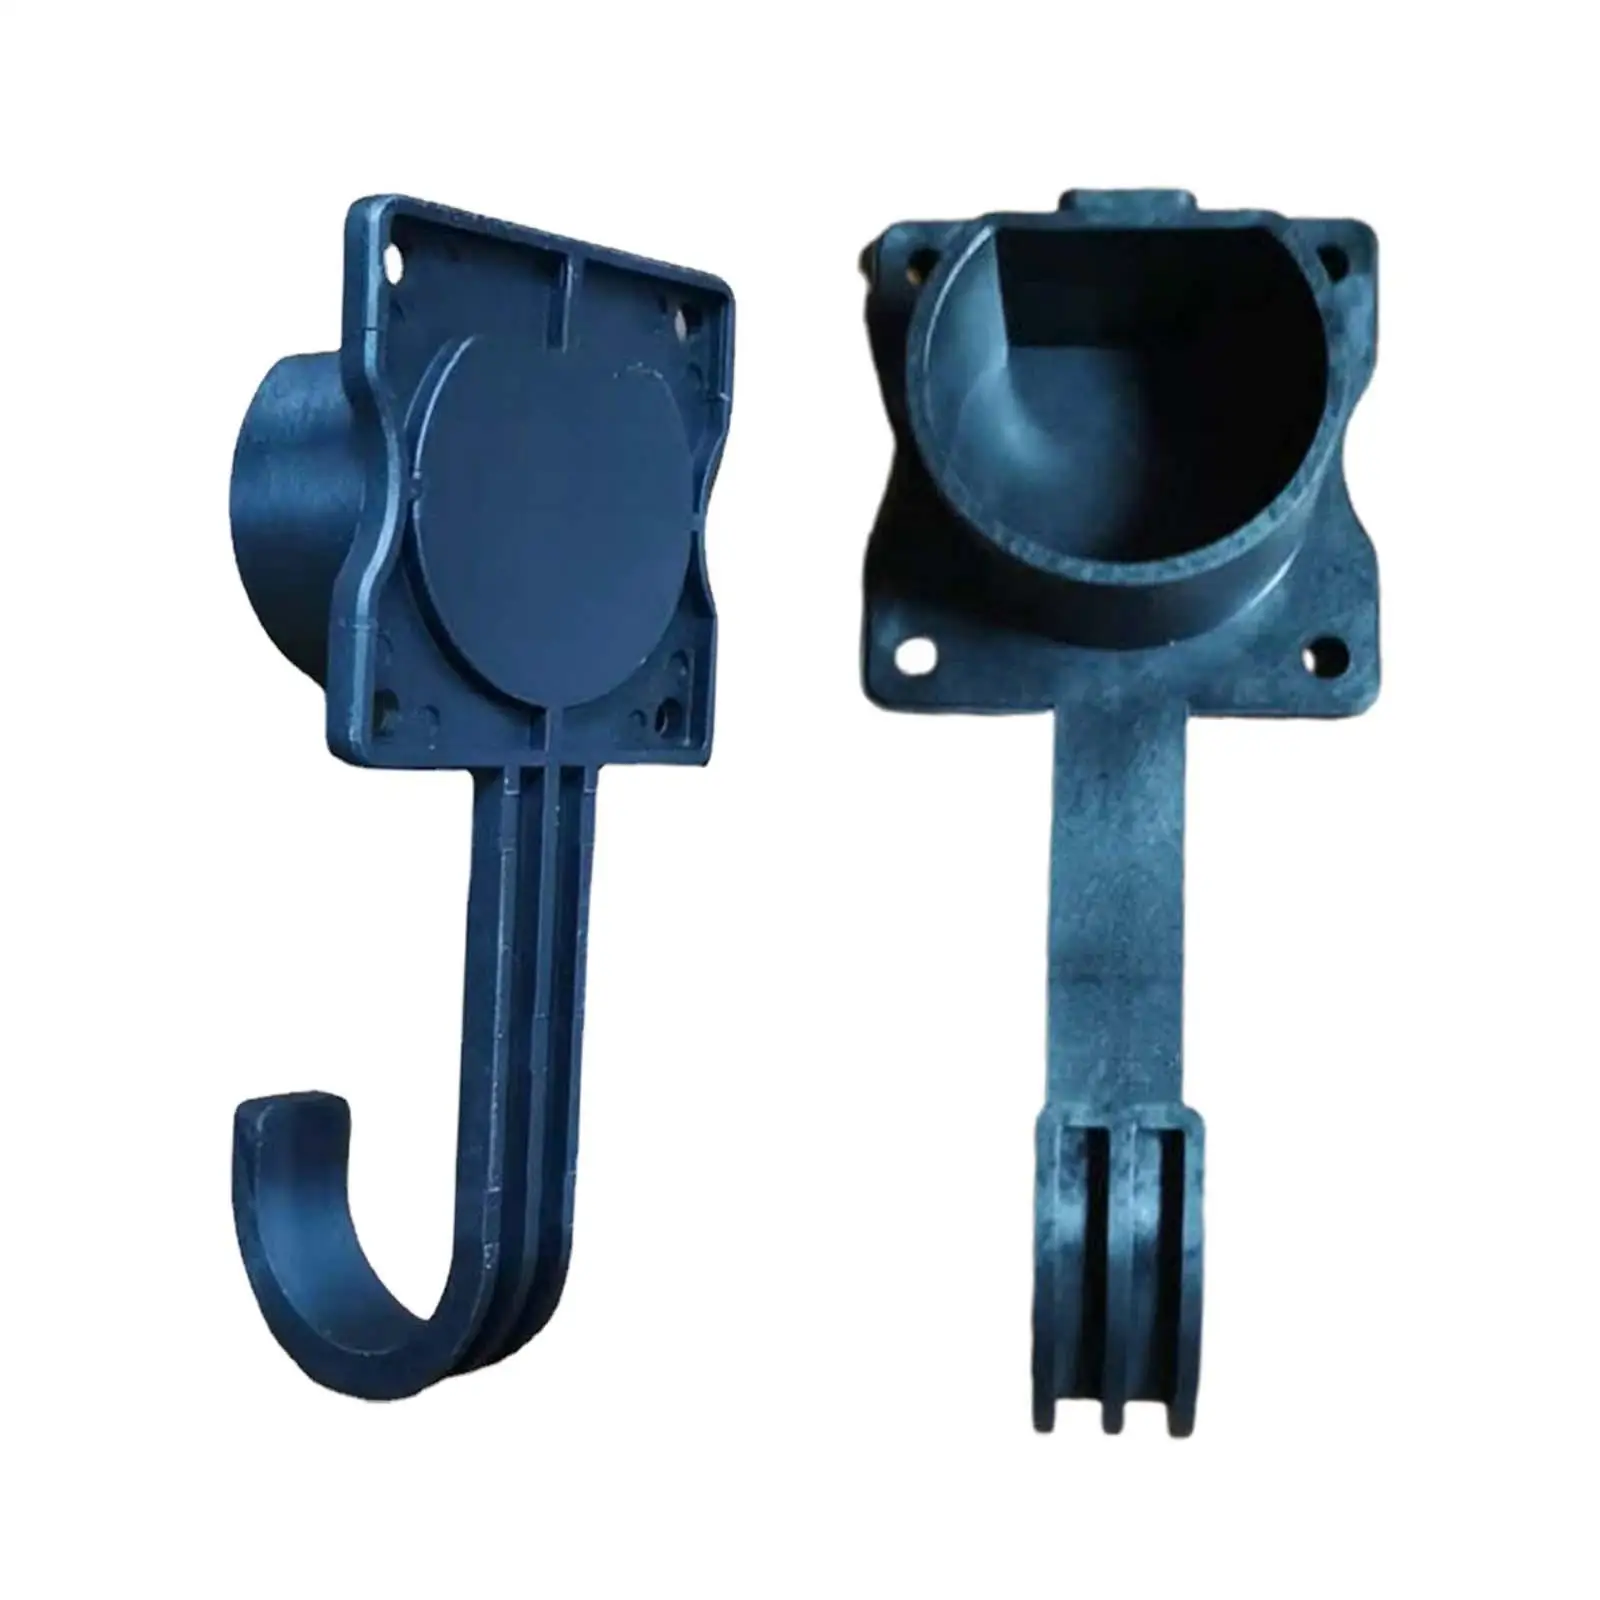 EV Charger Holder Easy to Install Professional Multifunction EV Charger Nozzle Holder Outside Ev Charging Cable